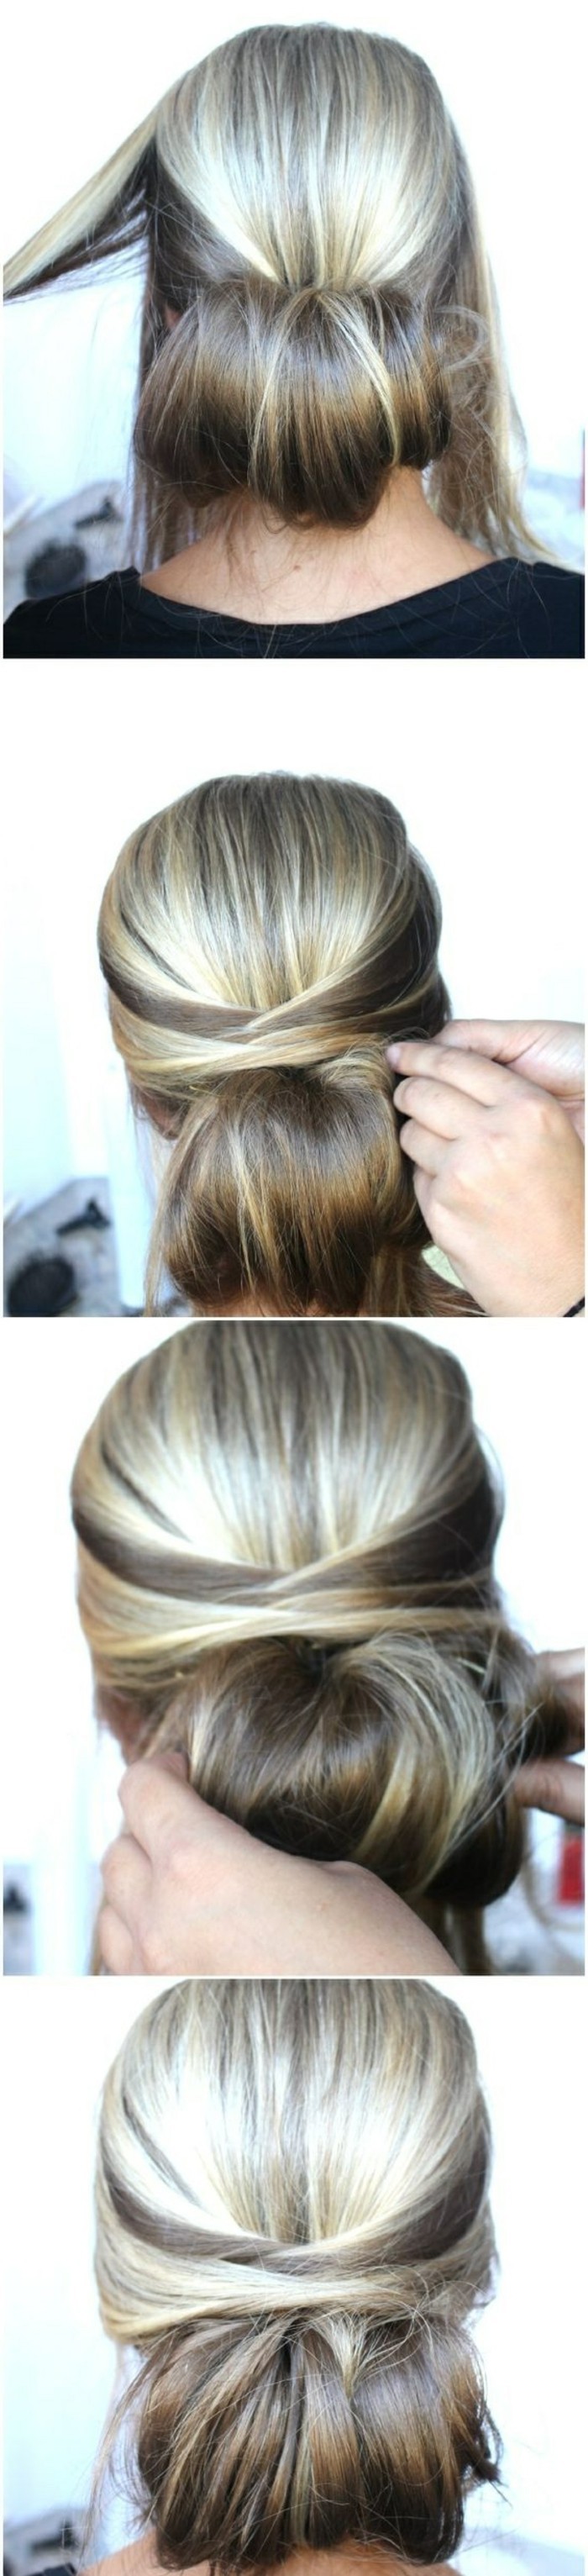 long hairstyles for women, step by step, diy tutorial, brown hair, blonde highlights, in a low updo